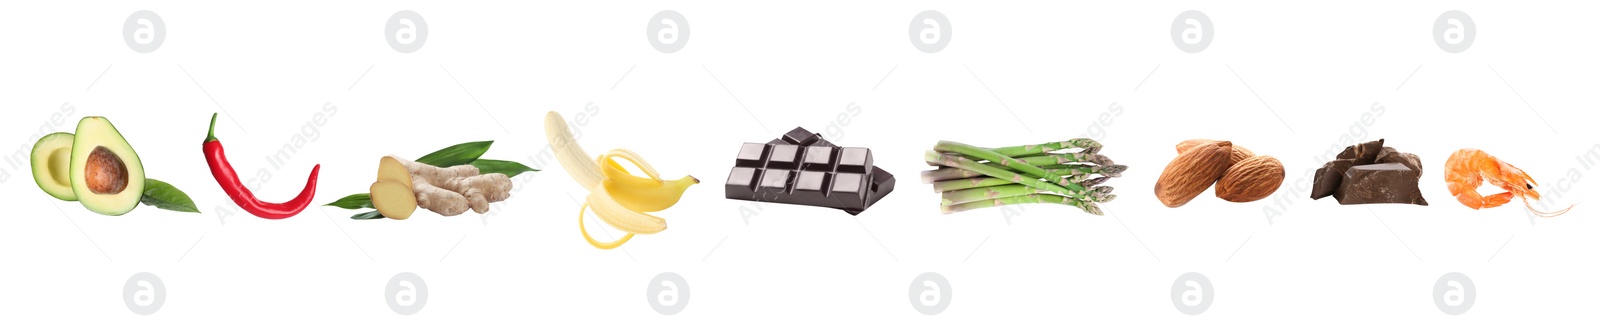 Image of Set with different aphrodisiac food for increasing sexual desire on white background, banner design